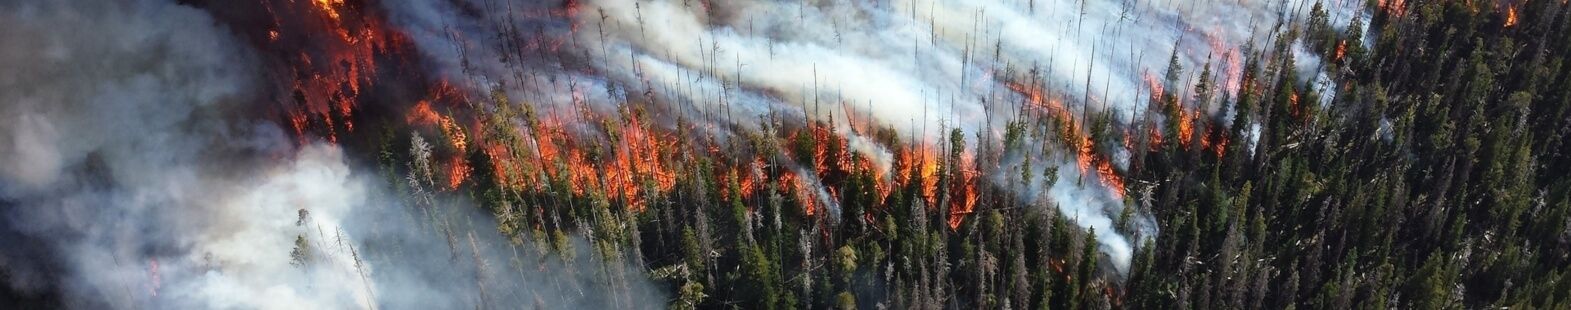 Photo shows a smiliing Bob Kochtubajda, caucasian man, balding with glasses, for his article on the 2014 wildfire season in the NWT